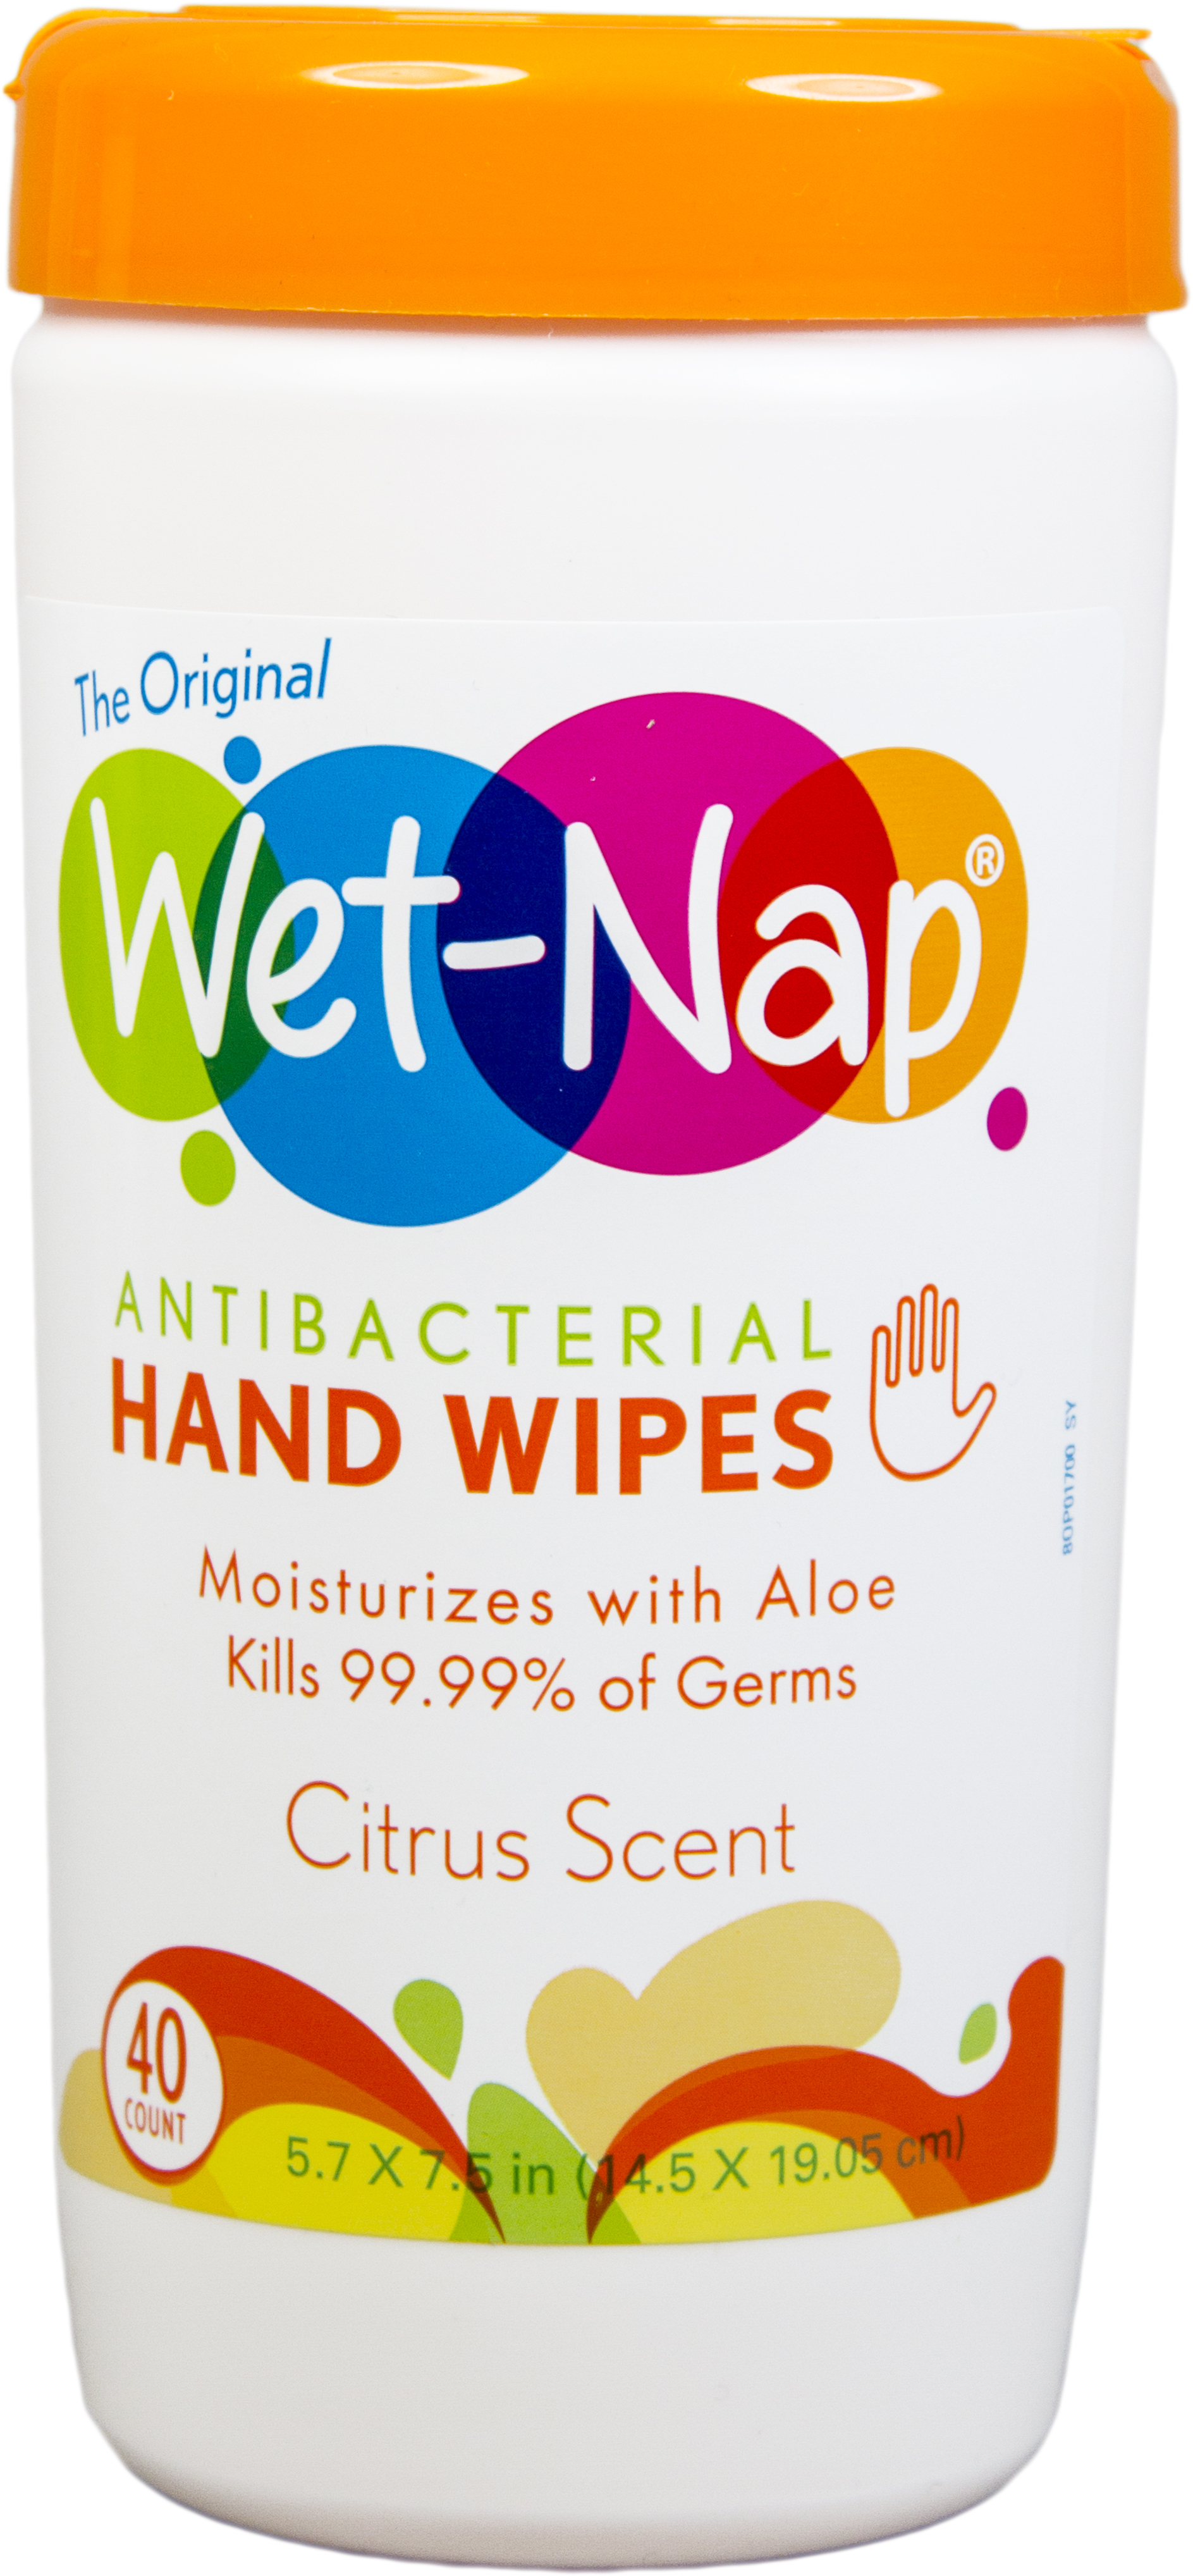 Wet-Nap Citrus Scent Antibacterial Hand Wipes, 40 sheets - image 1 of 3